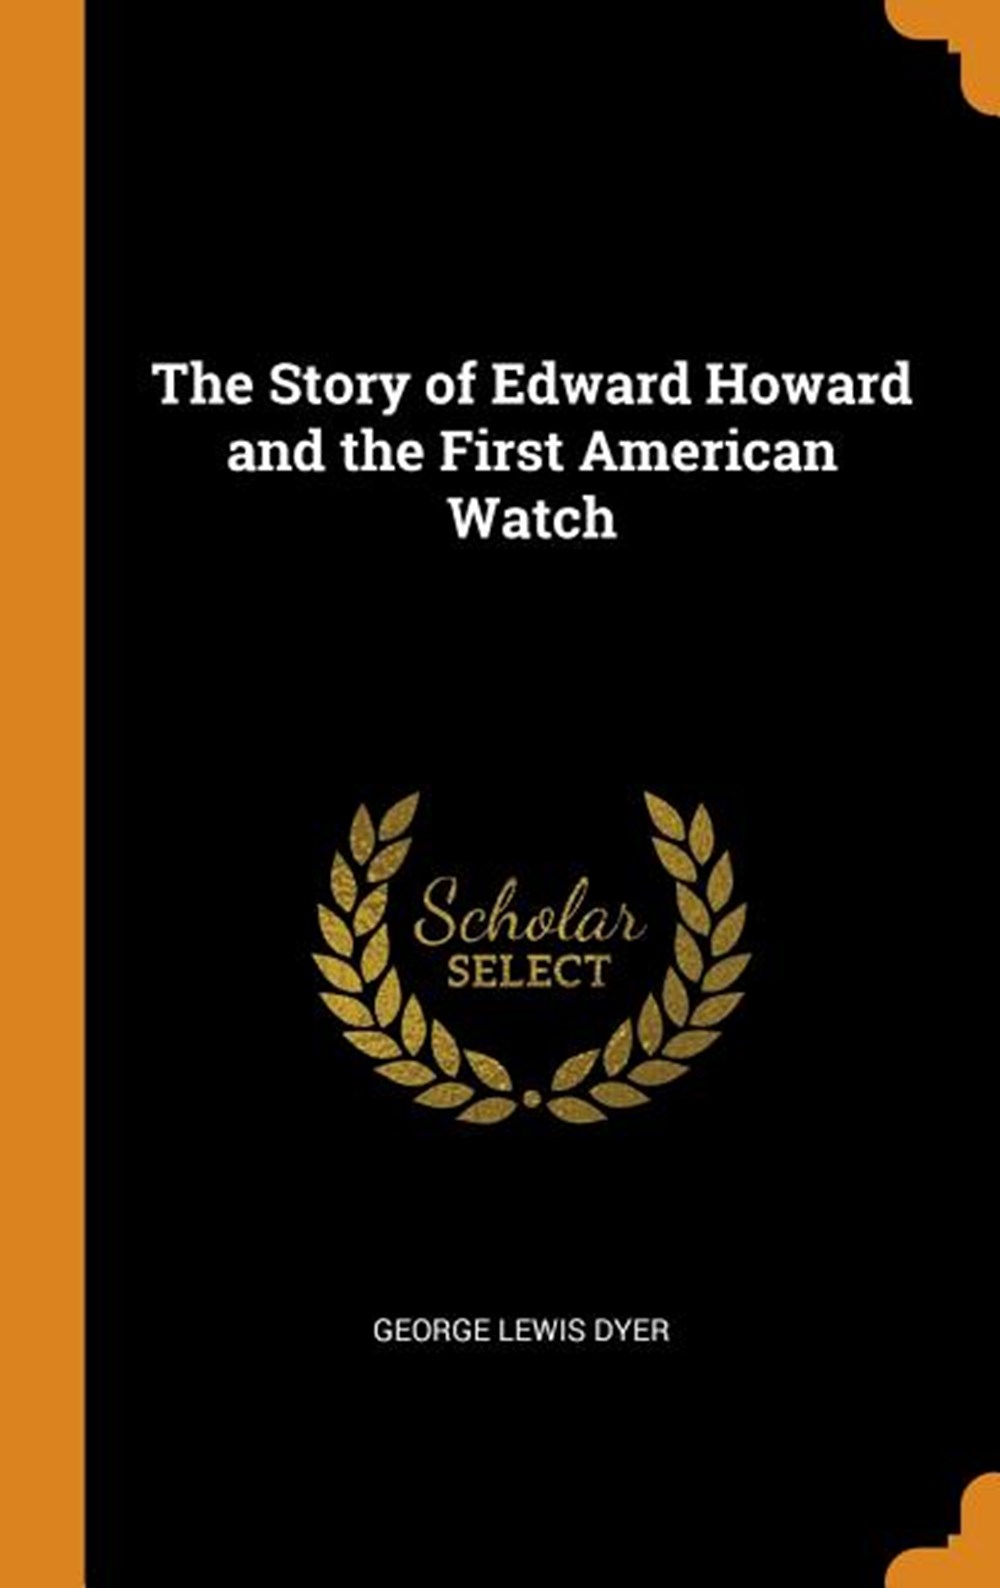 Story of Edward Howard and the First American Watch